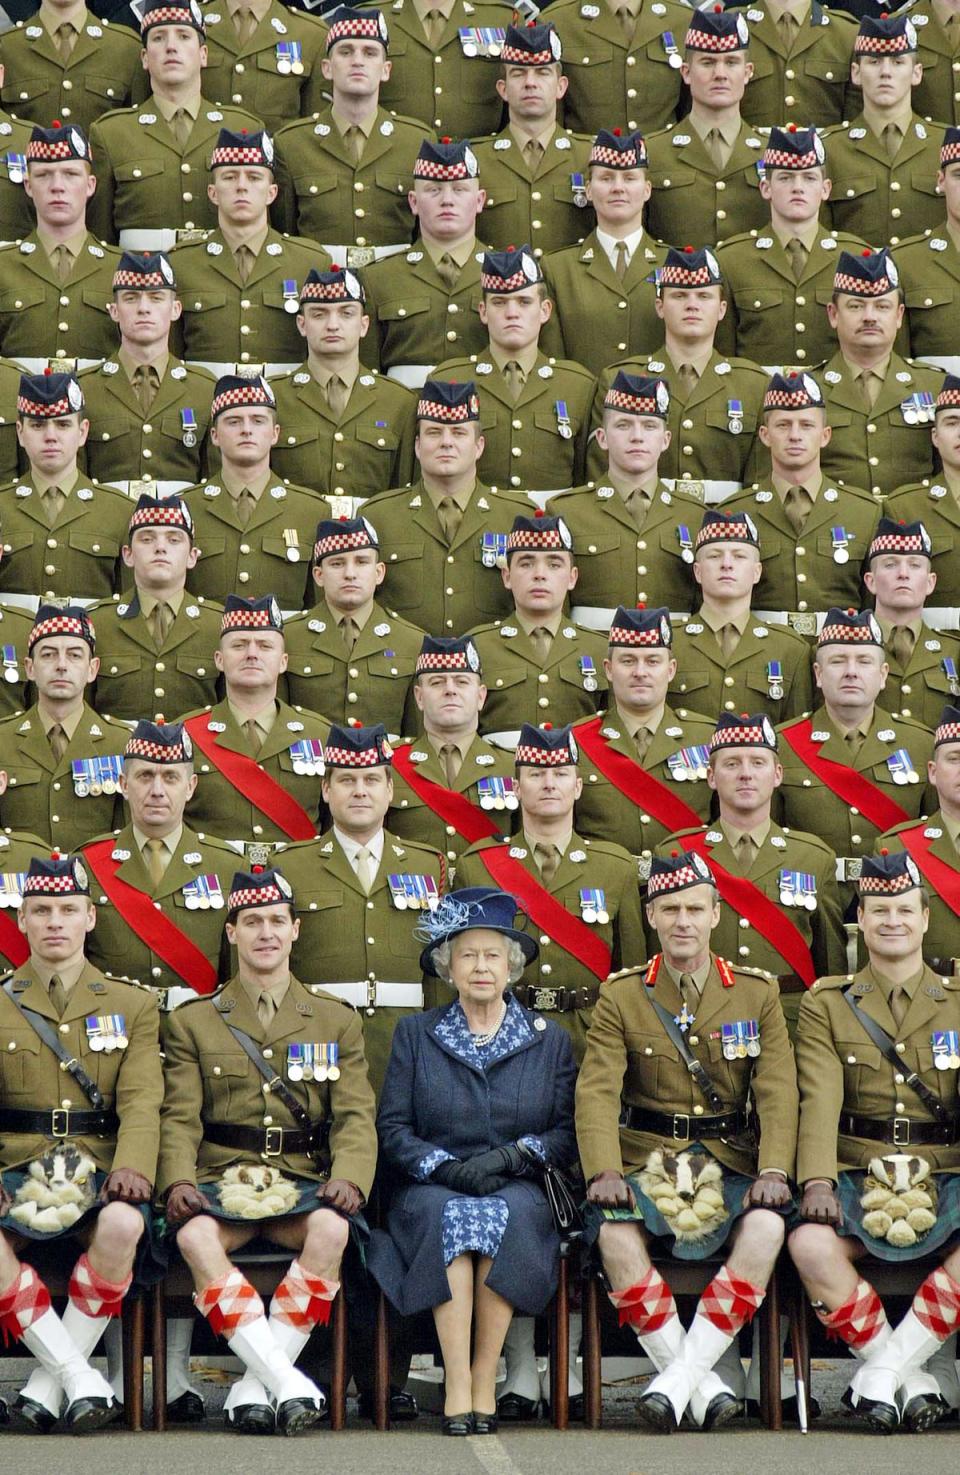 Queen Elizabeth II poses for a picture with members of the 1st Battalion of the Argyll and Sutherland Highlanders at Howe Barracks in Canterbury, 2004 (AFP/Getty)